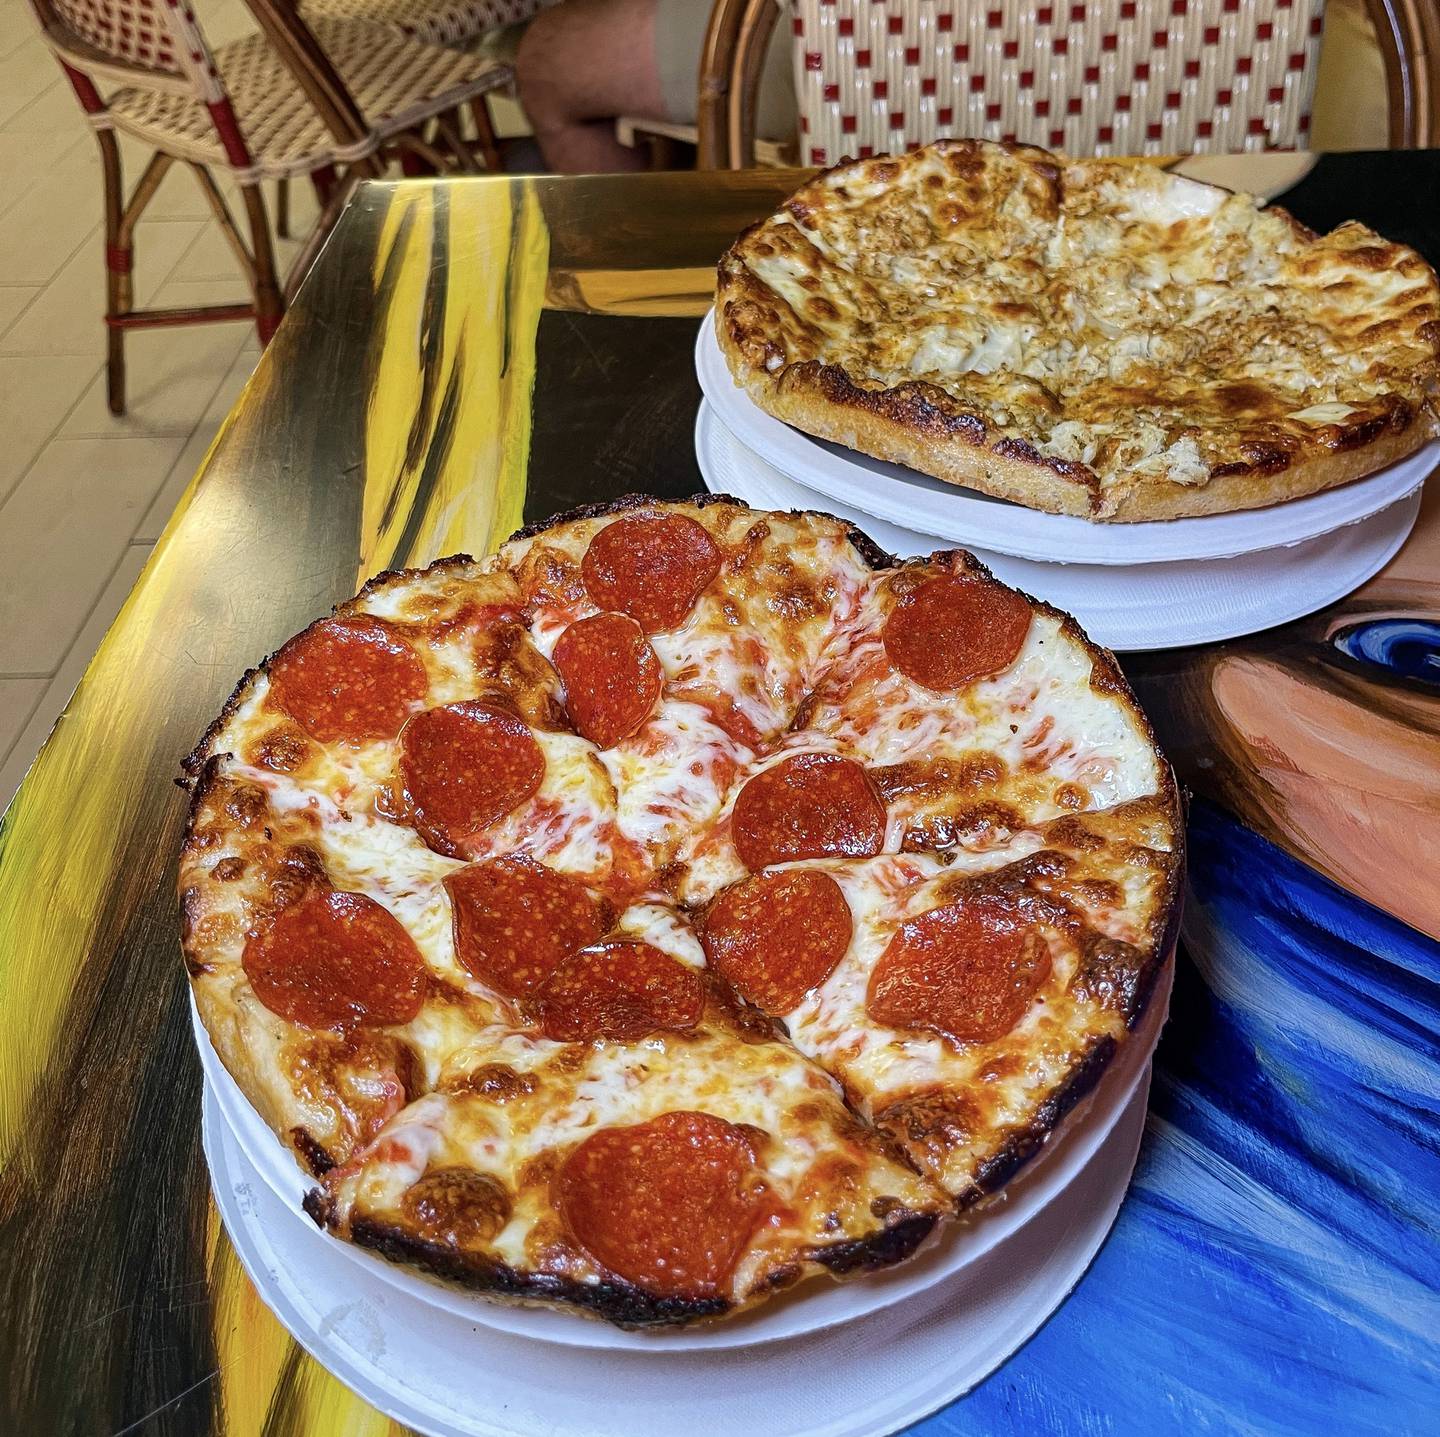 Since 1948, Matthew’s Pizzeria has been an institution of the neighborhood and the city itself. Serving what many call “Baltimore-style pizza,” their pies are saucy and cheesy with crispy edges, and a soft, deep-dish crust.